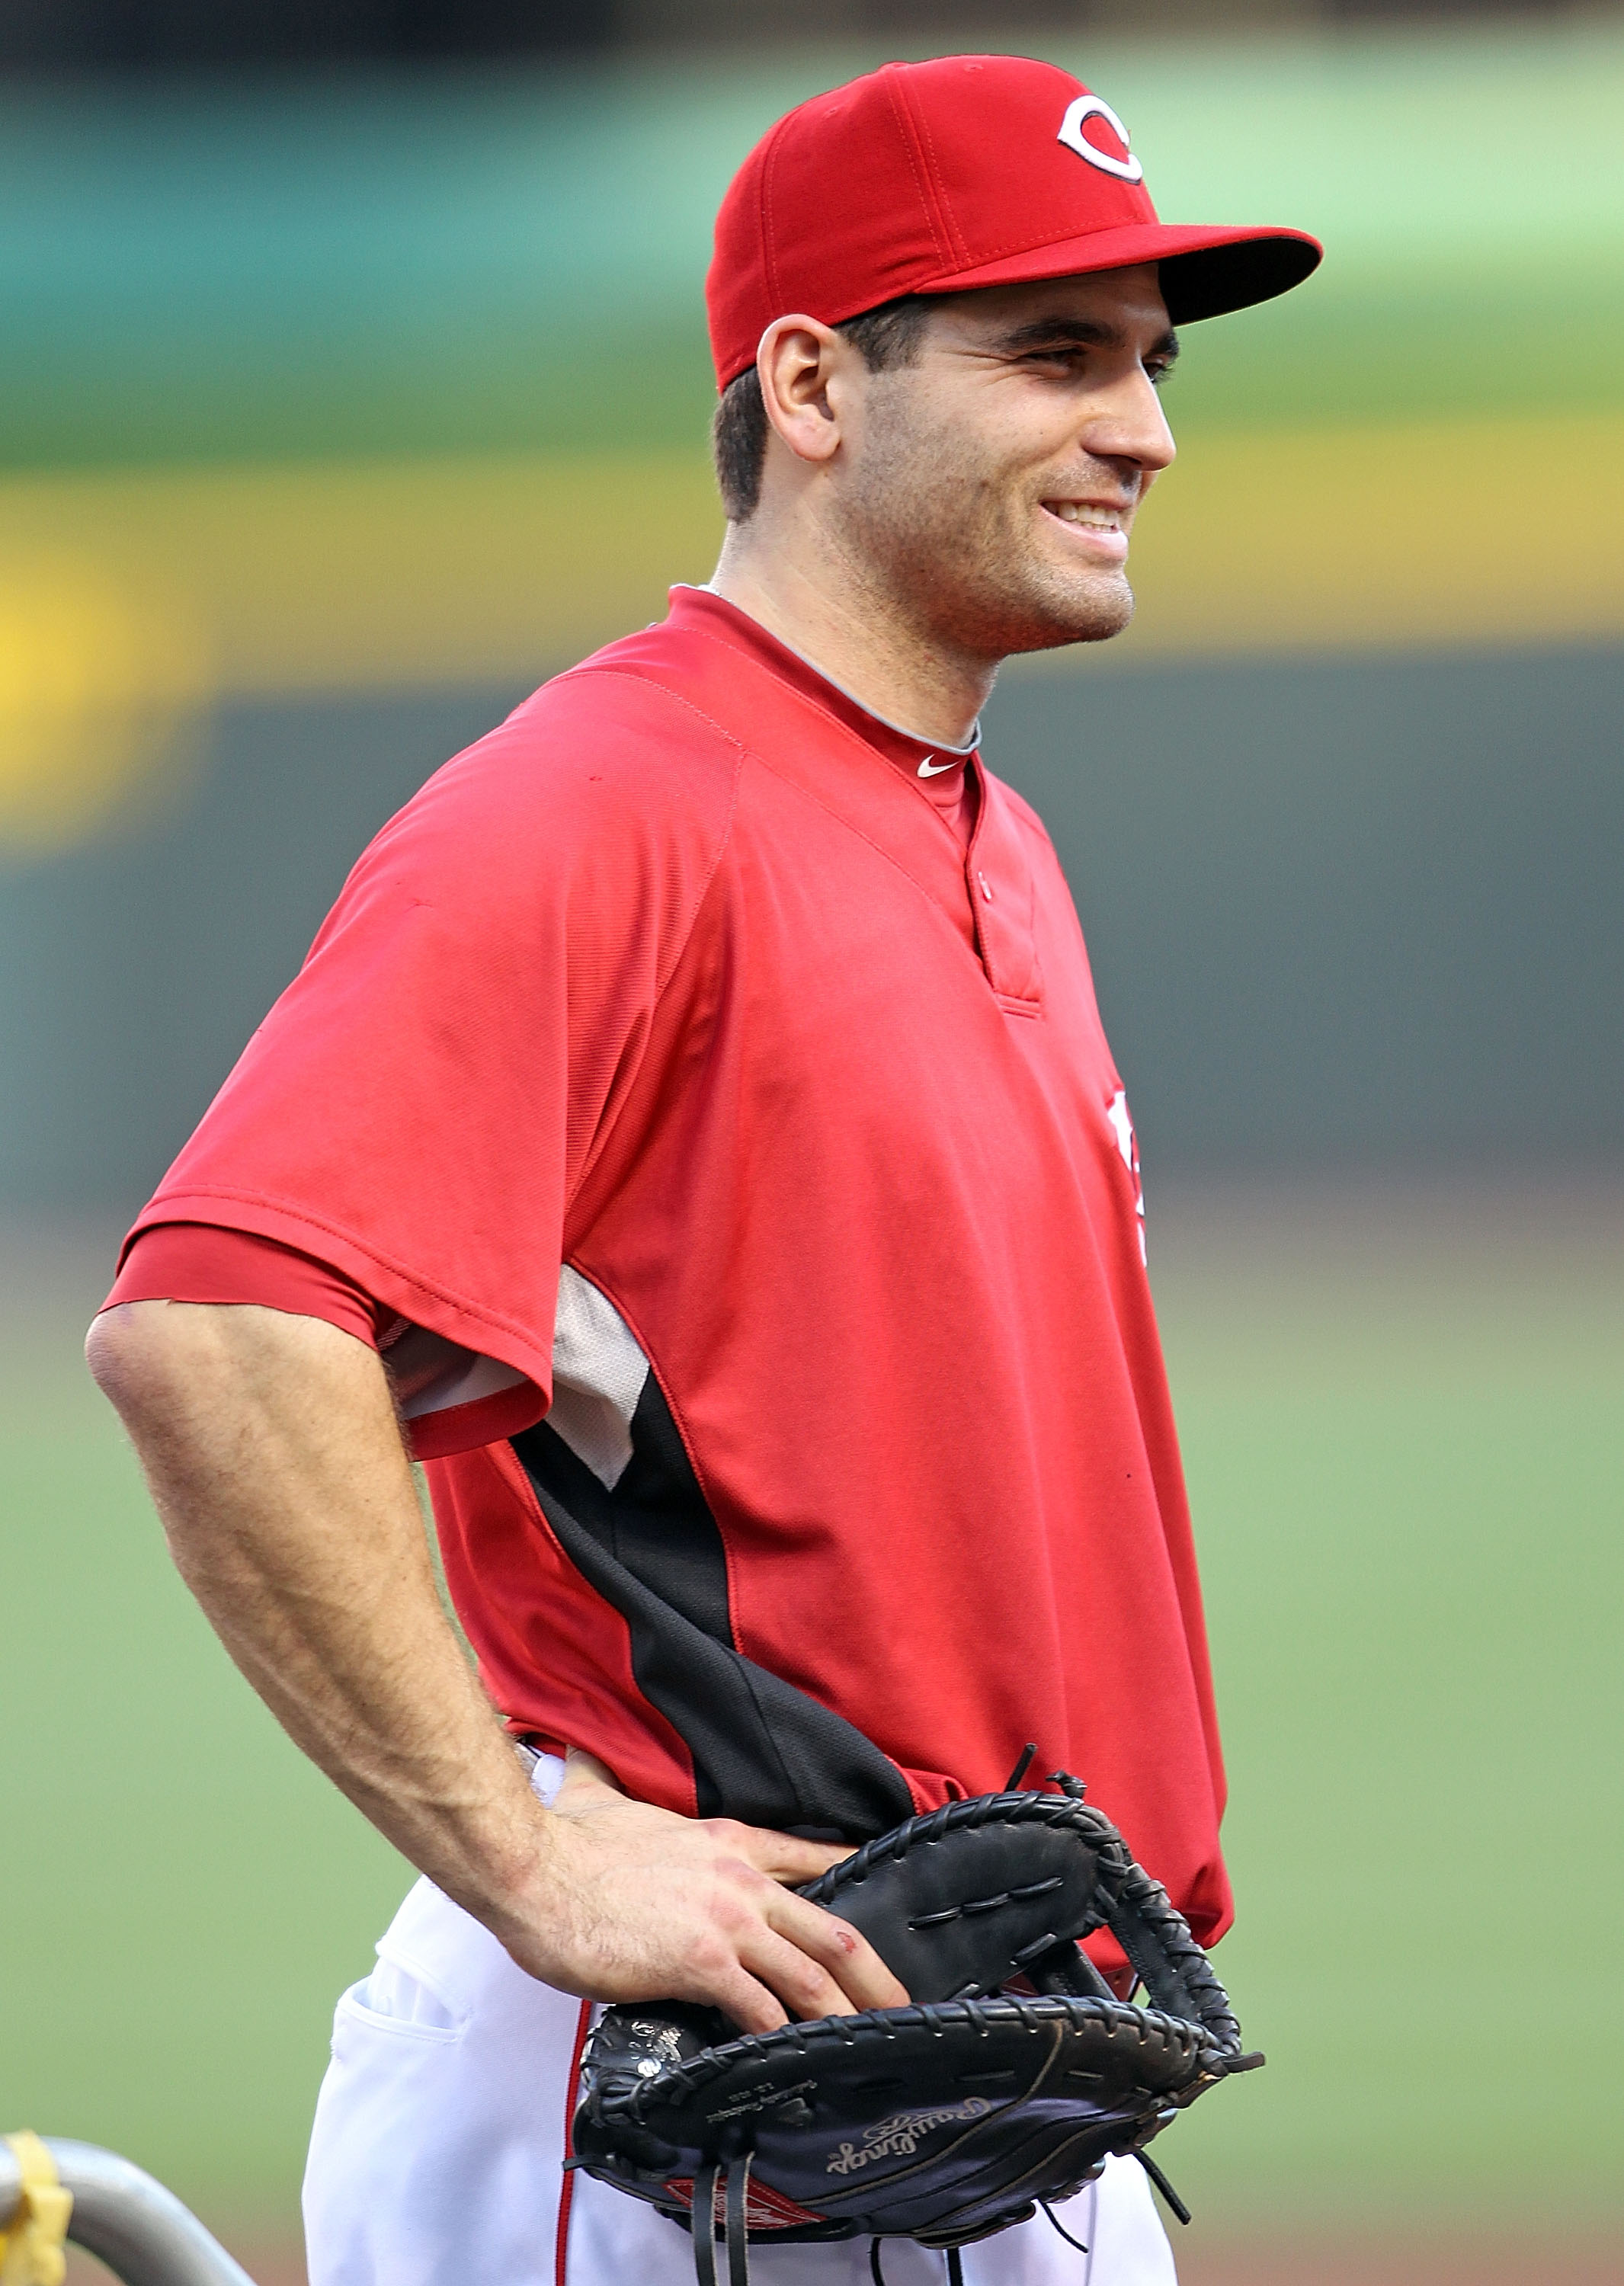 CINCINNATI - OCTOBER 10:  Joey Votto #19 of the Cincinnati Reds participates in batting practice before the start of  Game 3 of the NLDS against the Philadelphia Phillies  at Great American Ball Park on October 10, 2010 in Cincinnati, Ohio.  (Photo by And